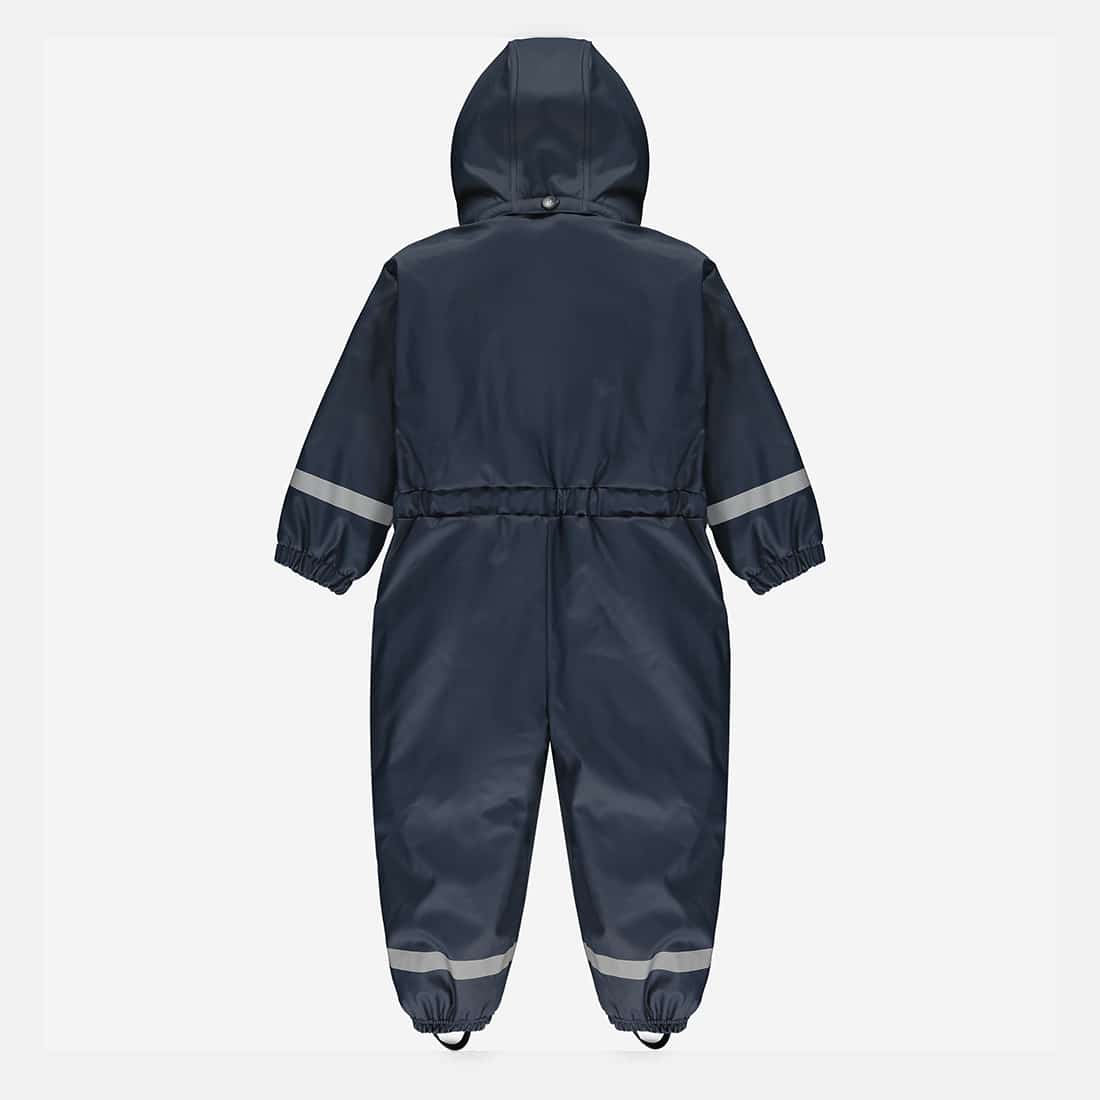 Puddleflex All-in-One Navy